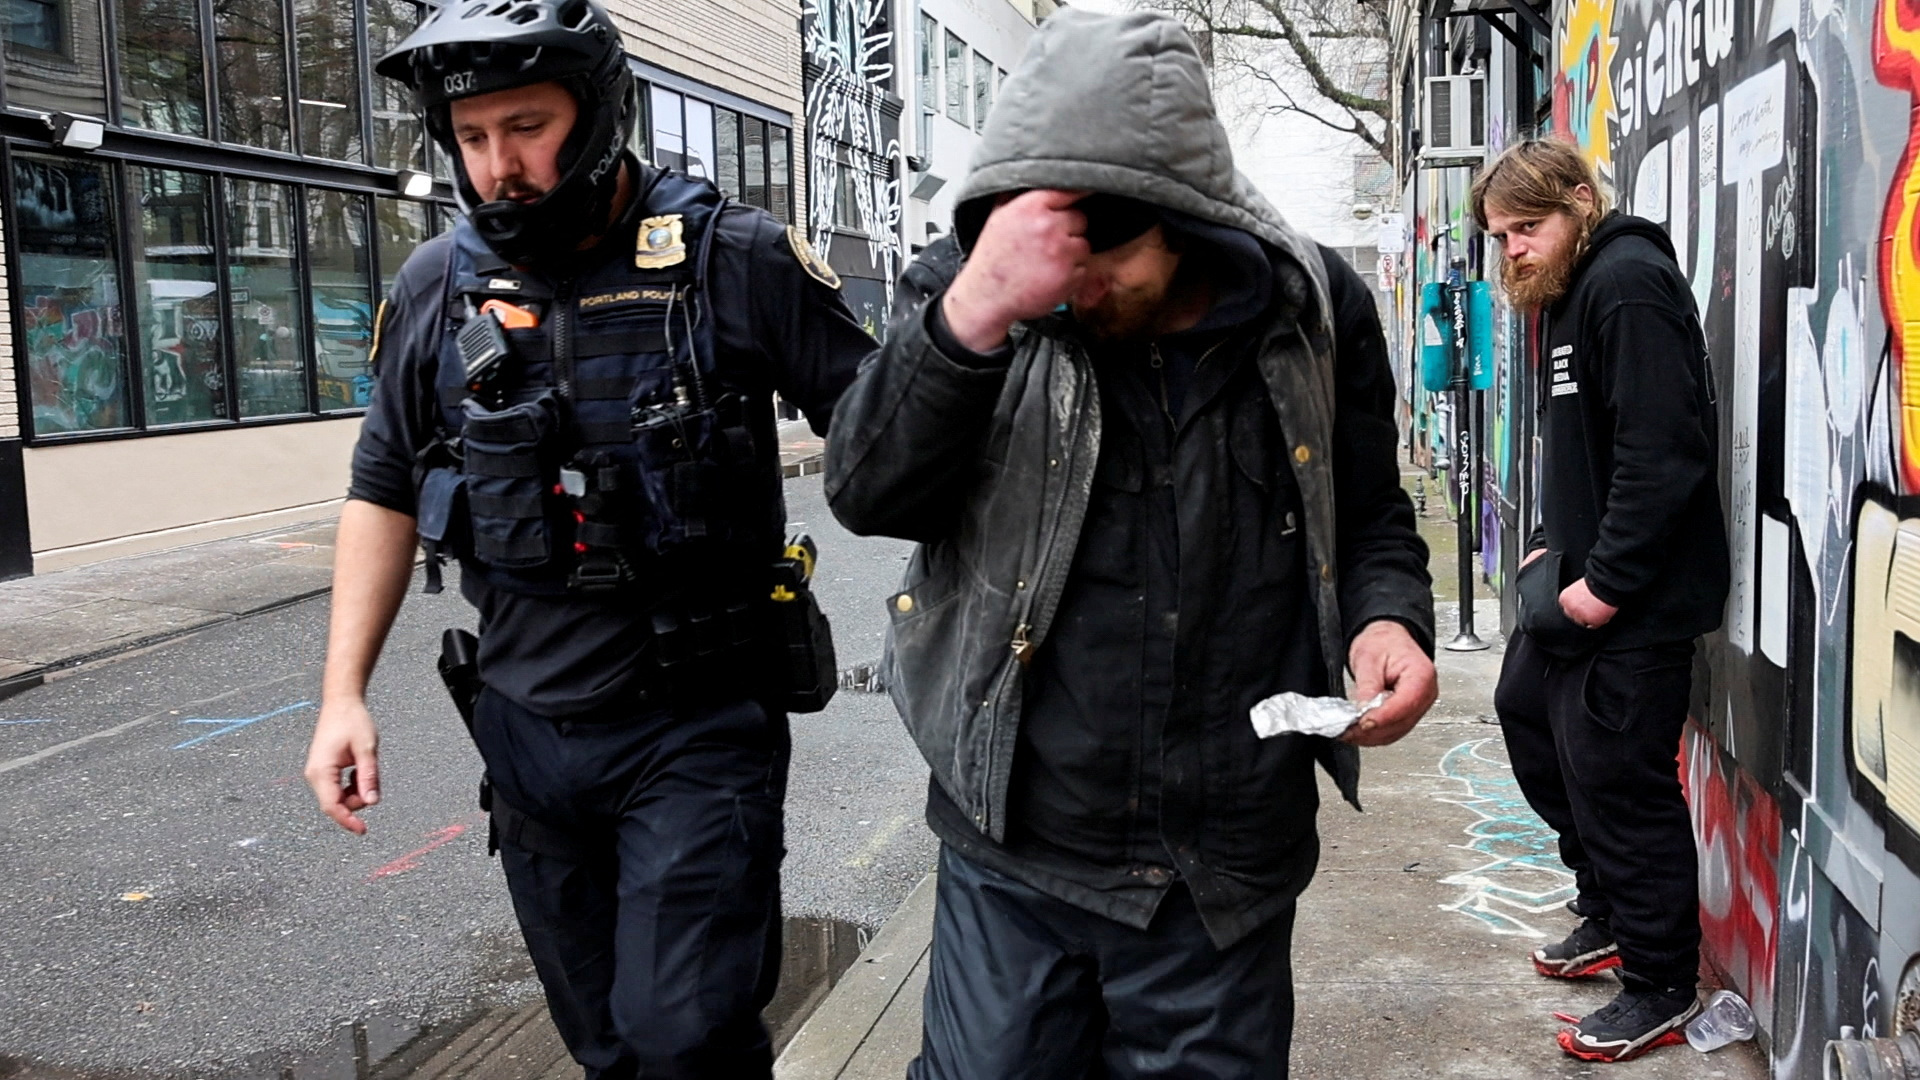 Police officer issues a citation to a man for smoking fentanyl in Portland